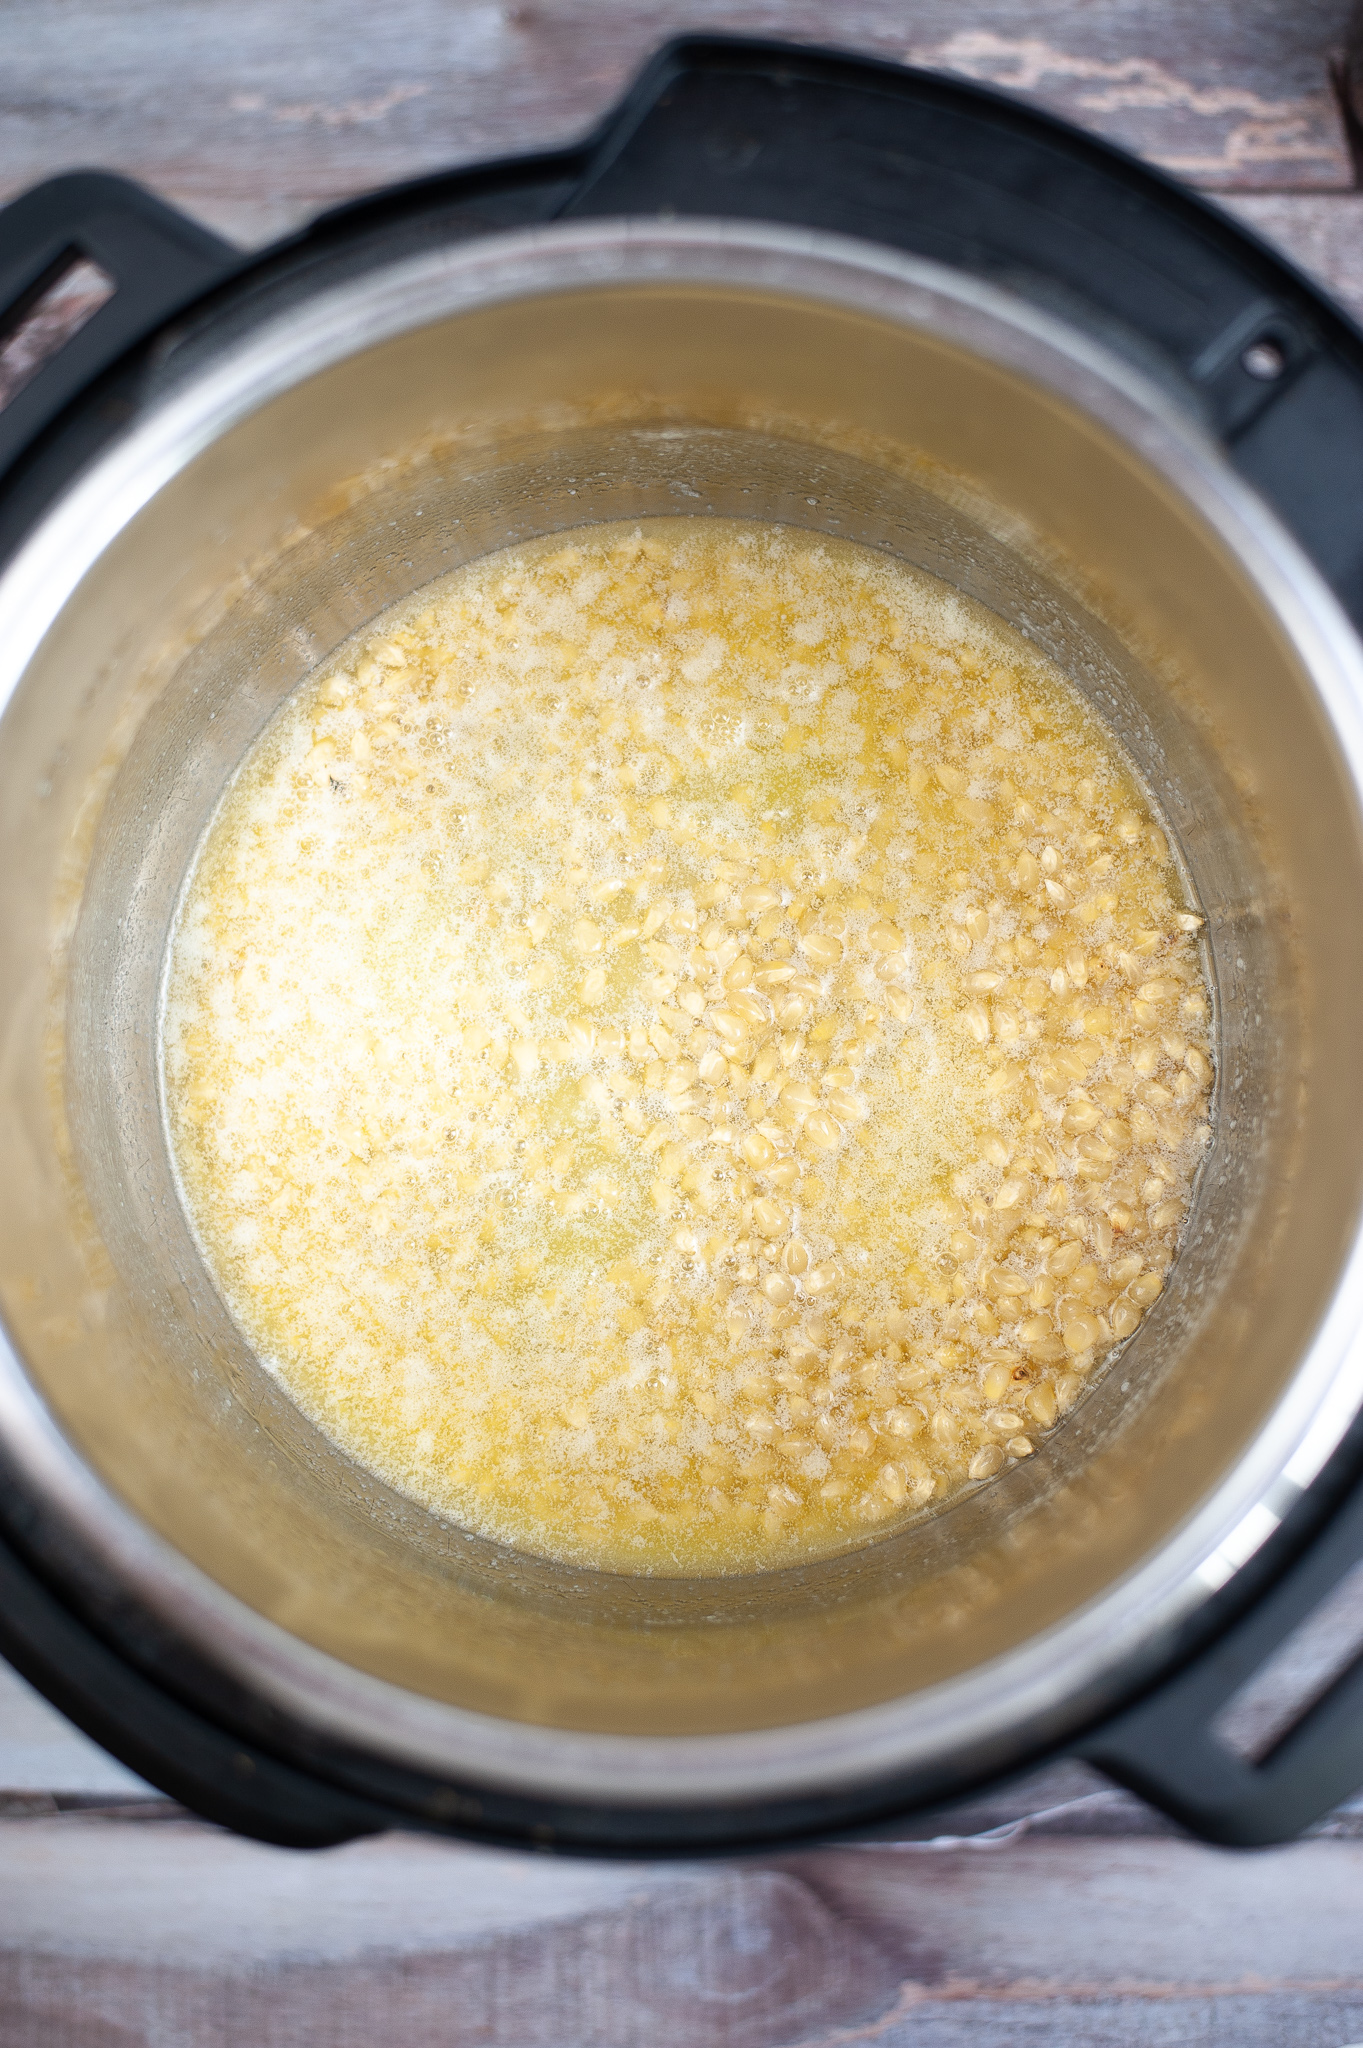 Instant pot with melted butter with popcorn kernels at the bottom.